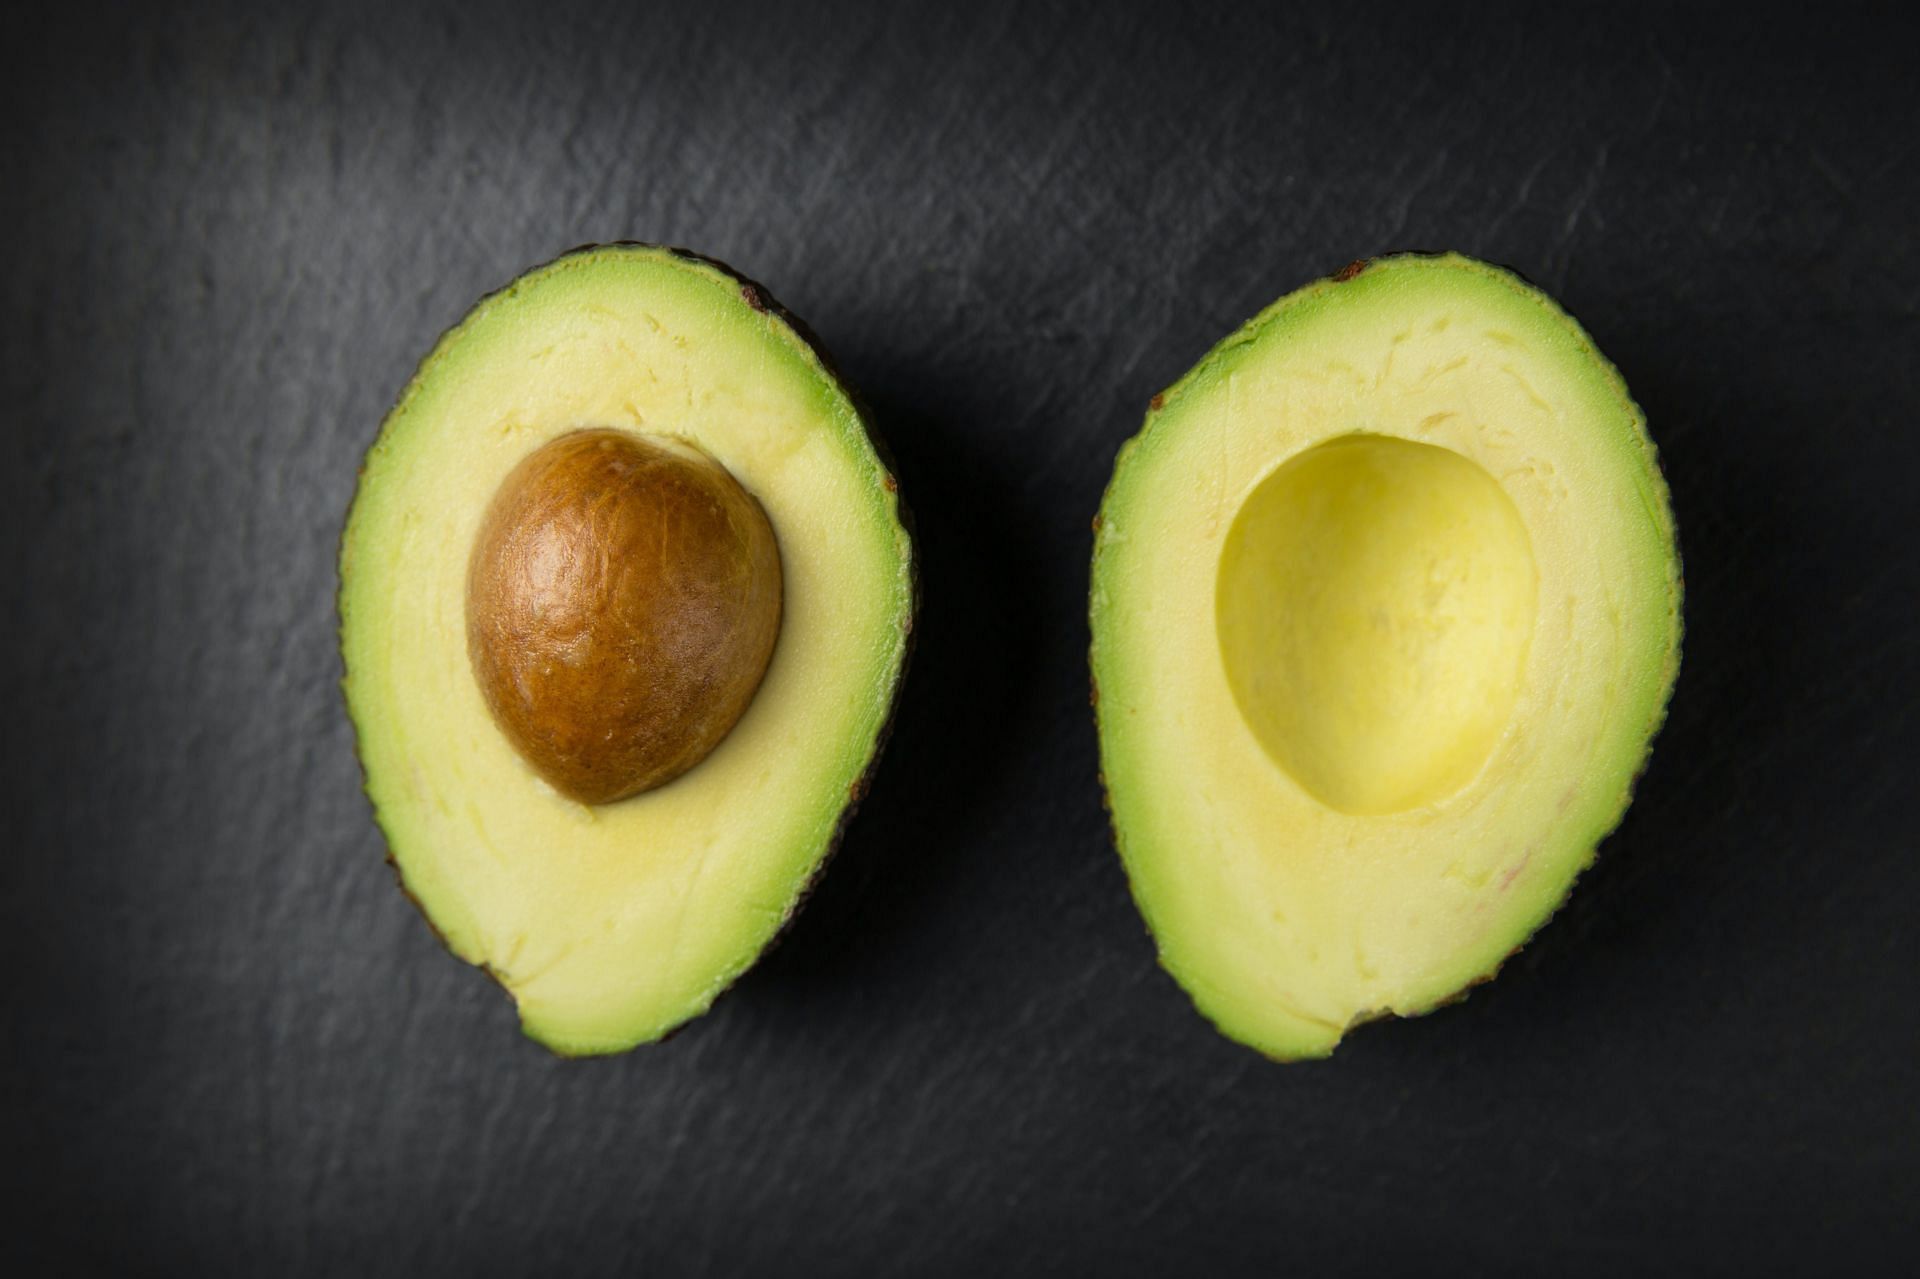 Avocado is food to stimulate brain (Image sourced via Pexels / Photo by foodie-factor)